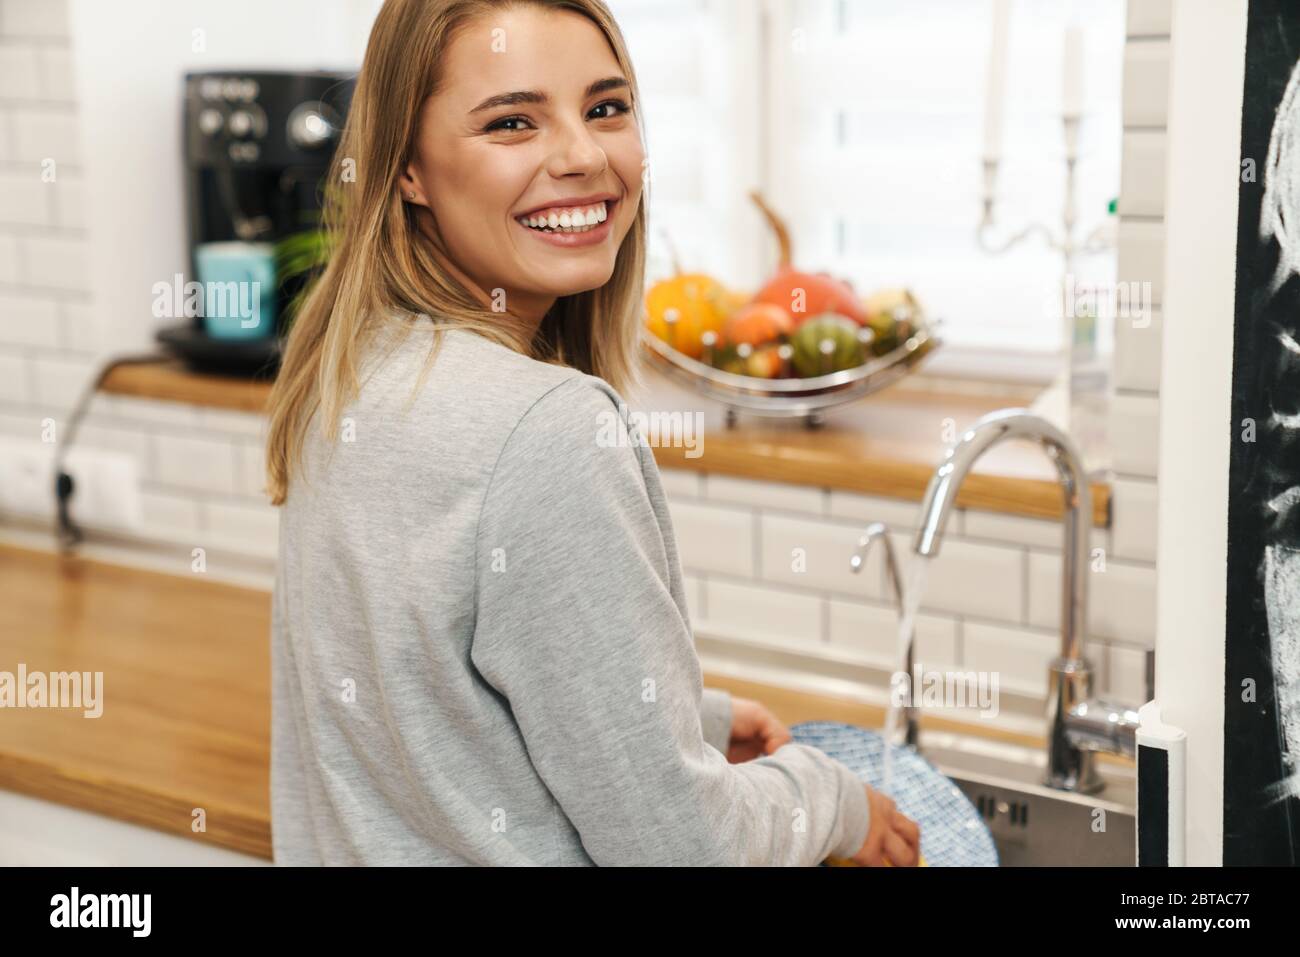 Caucasian woman washing dishes in kitchen Stock Photo - Alamy